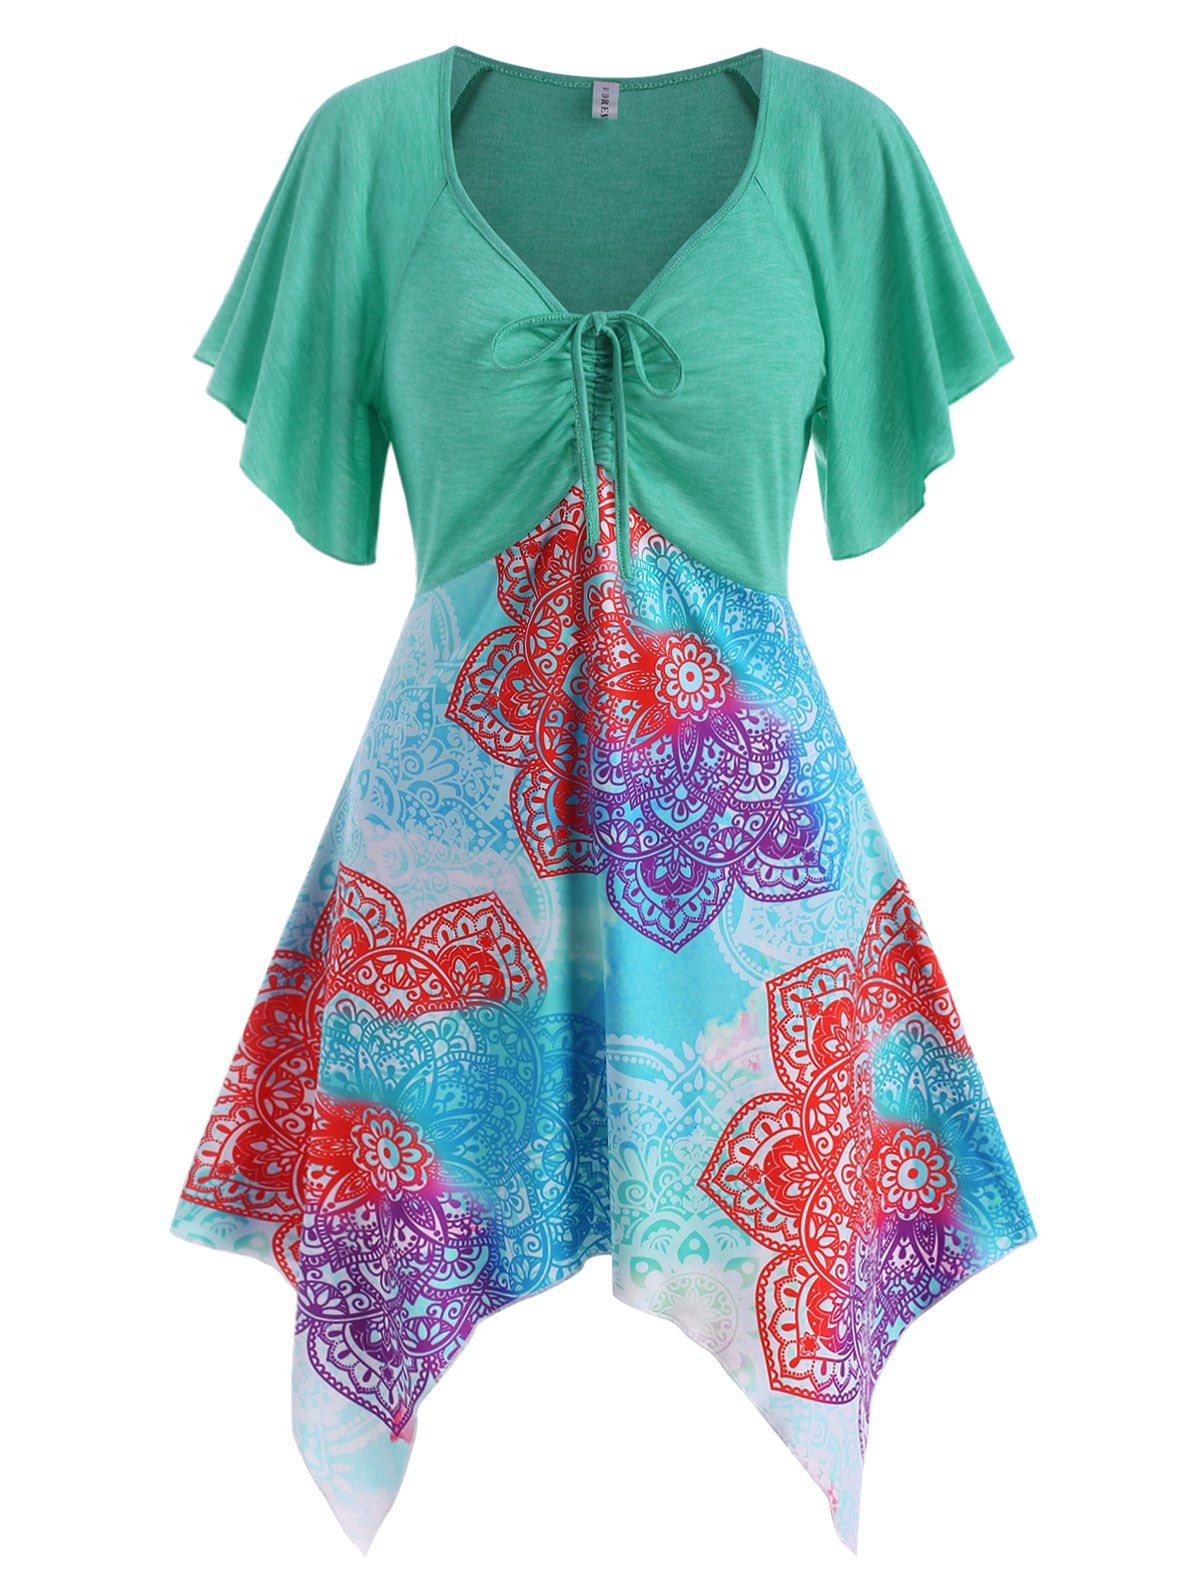 Cinched Ruched Printed Asymmetrical Tunic Top - BLUE XXXL